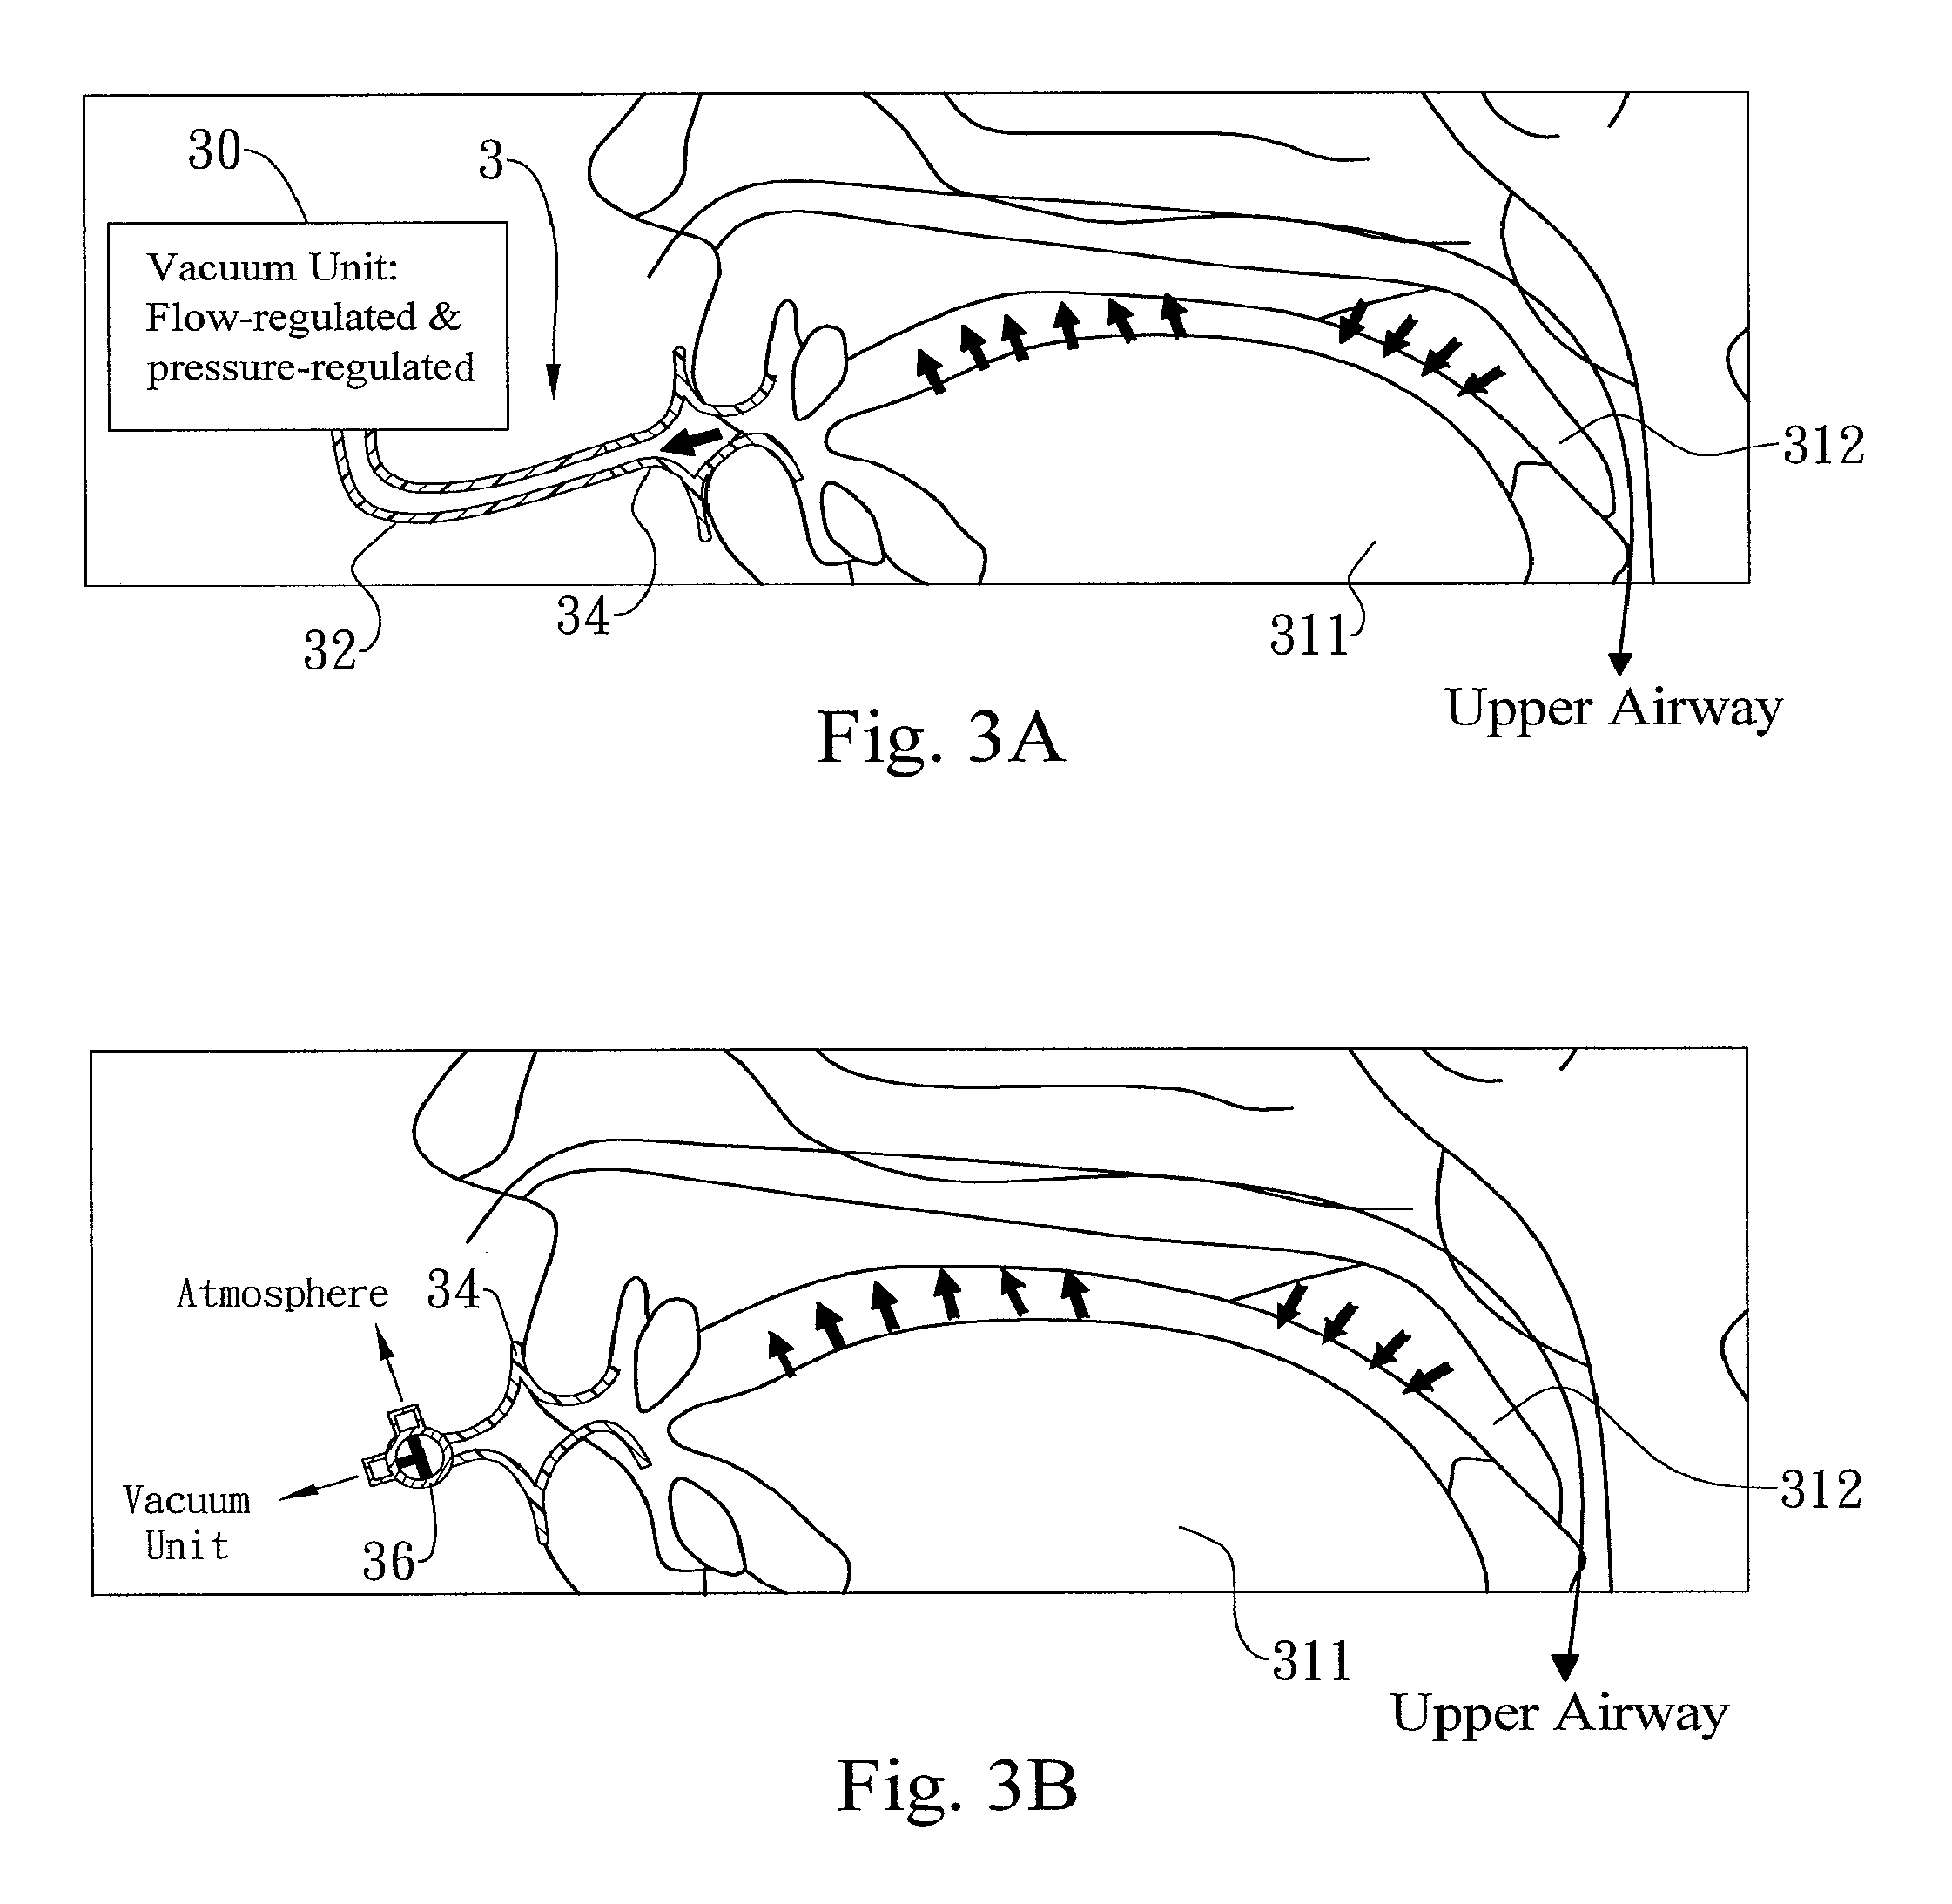 Method and apparatus for treating obstructive sleep apnea by using negative oral pressure to a patient